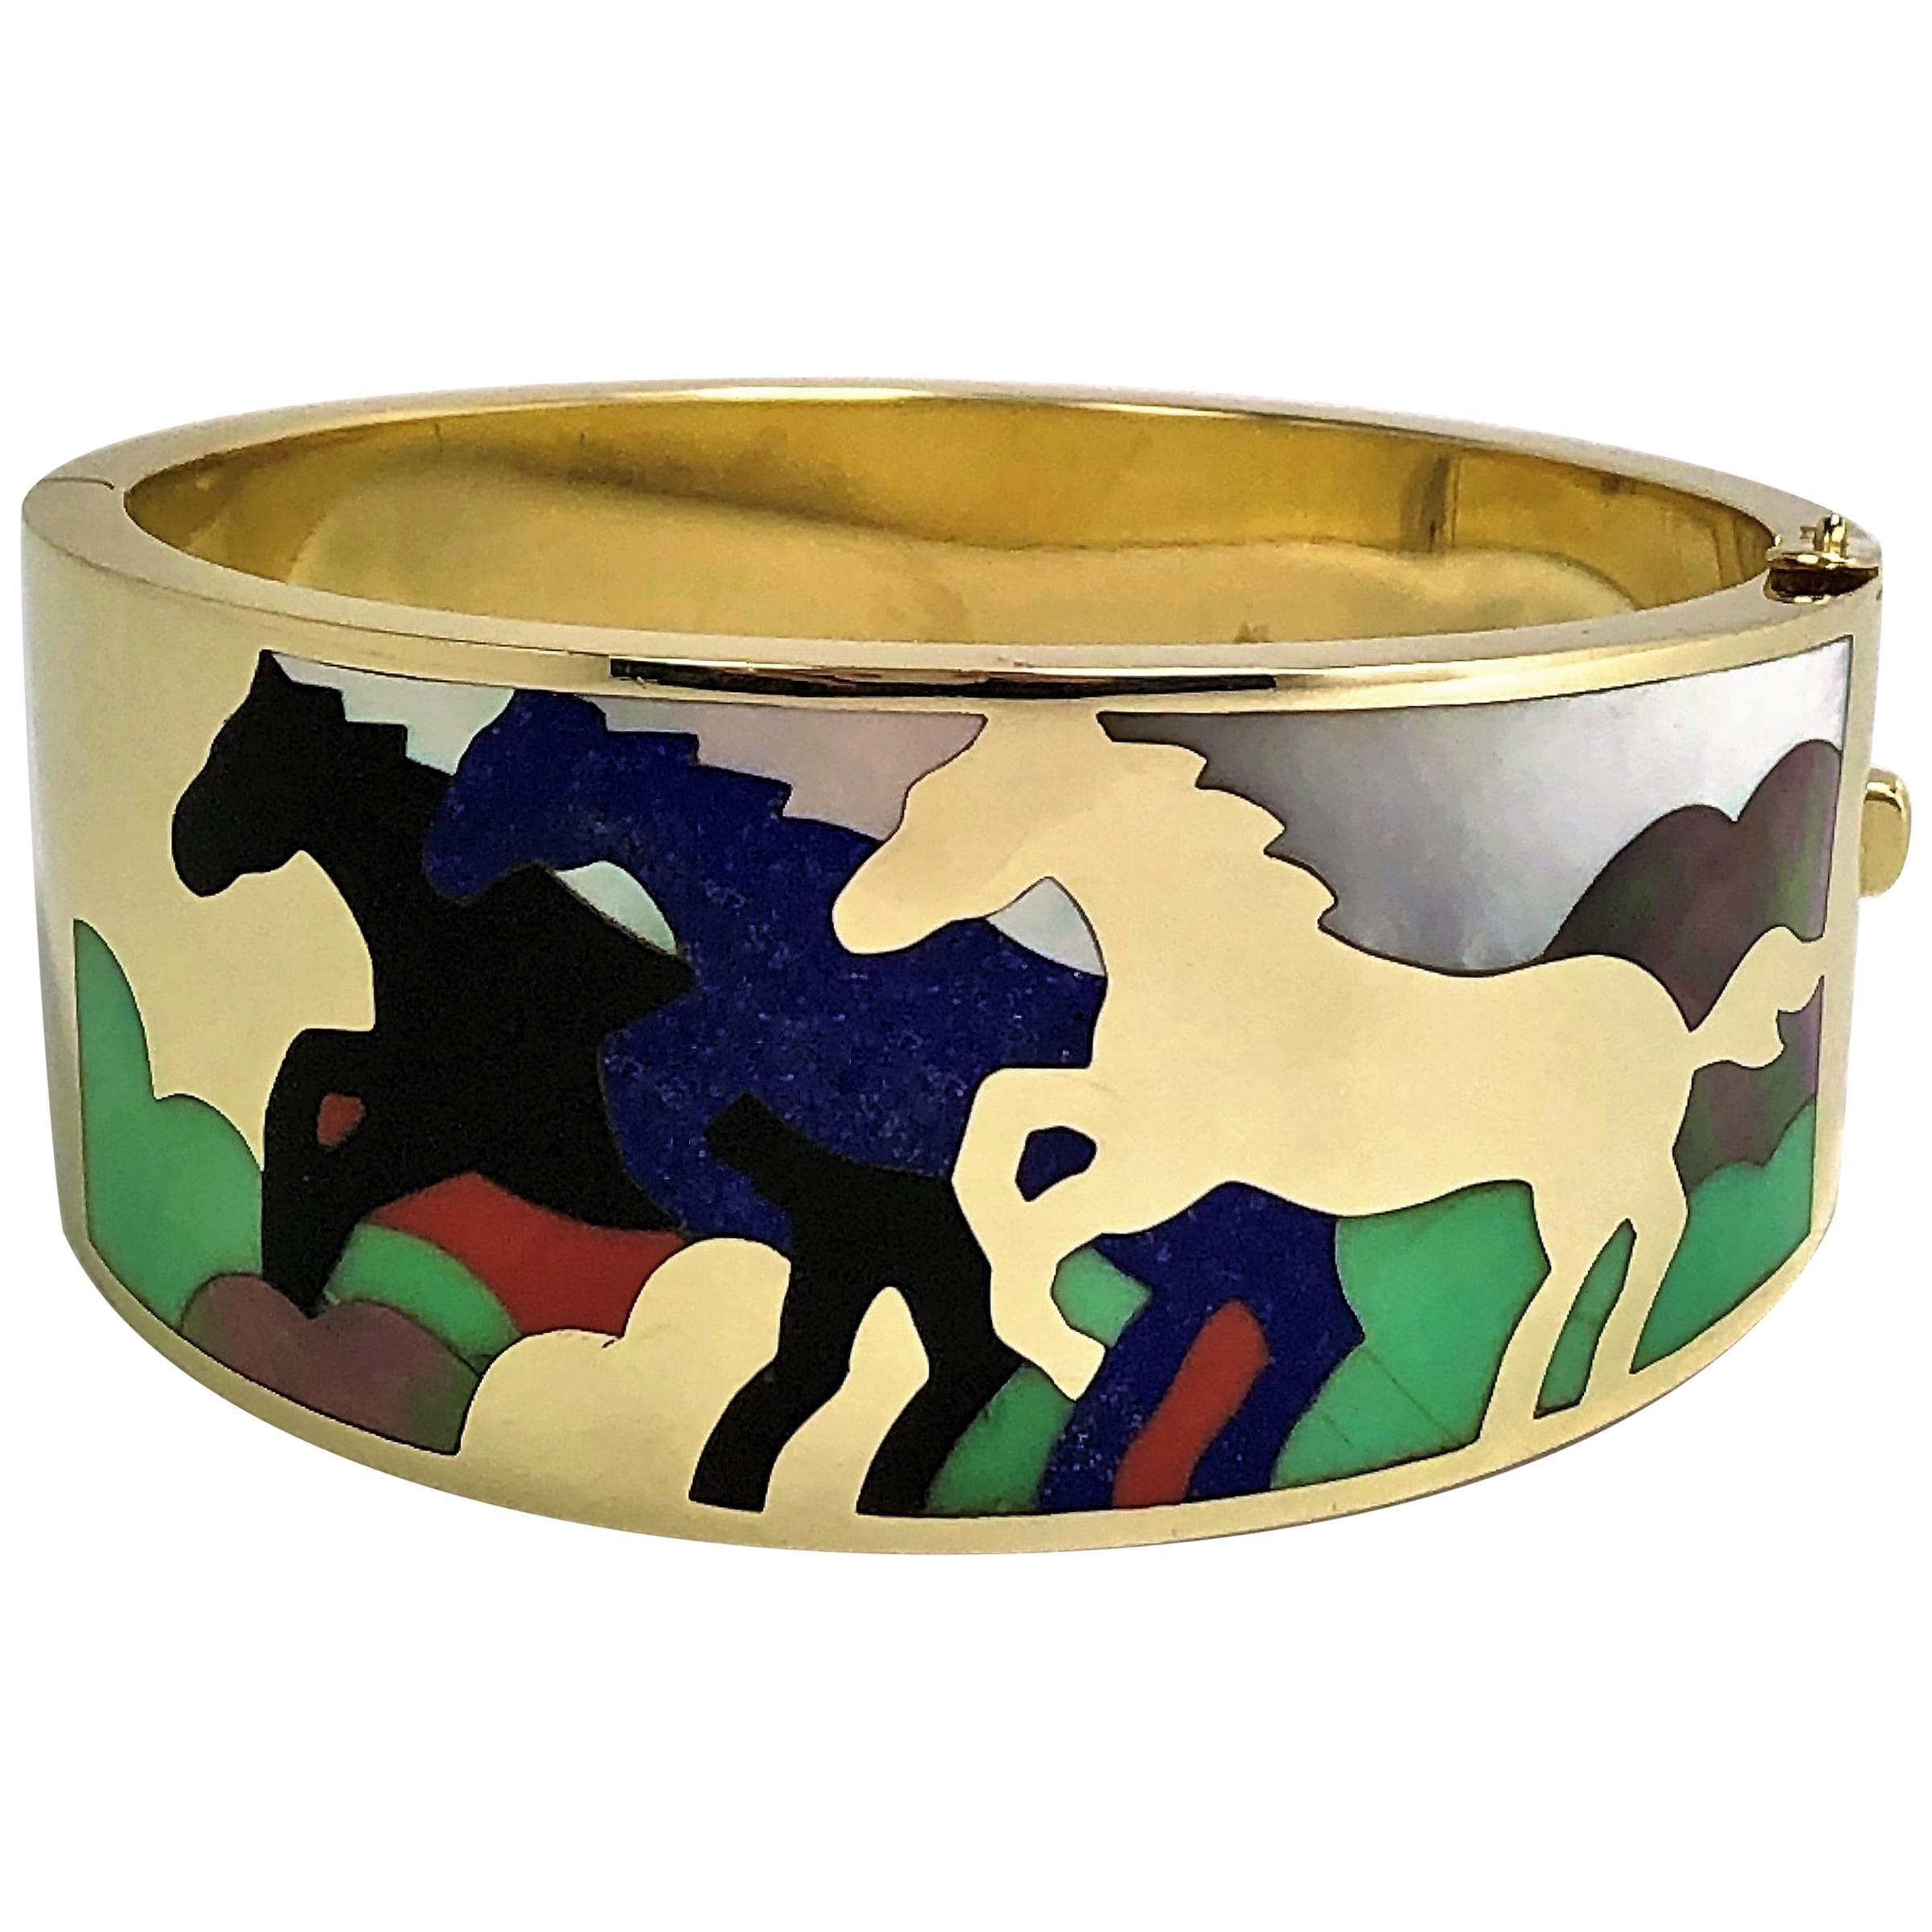 Asch Grossbardt Stampeding Horses Themed Gold Inlaid Stone Cuff/Bangle